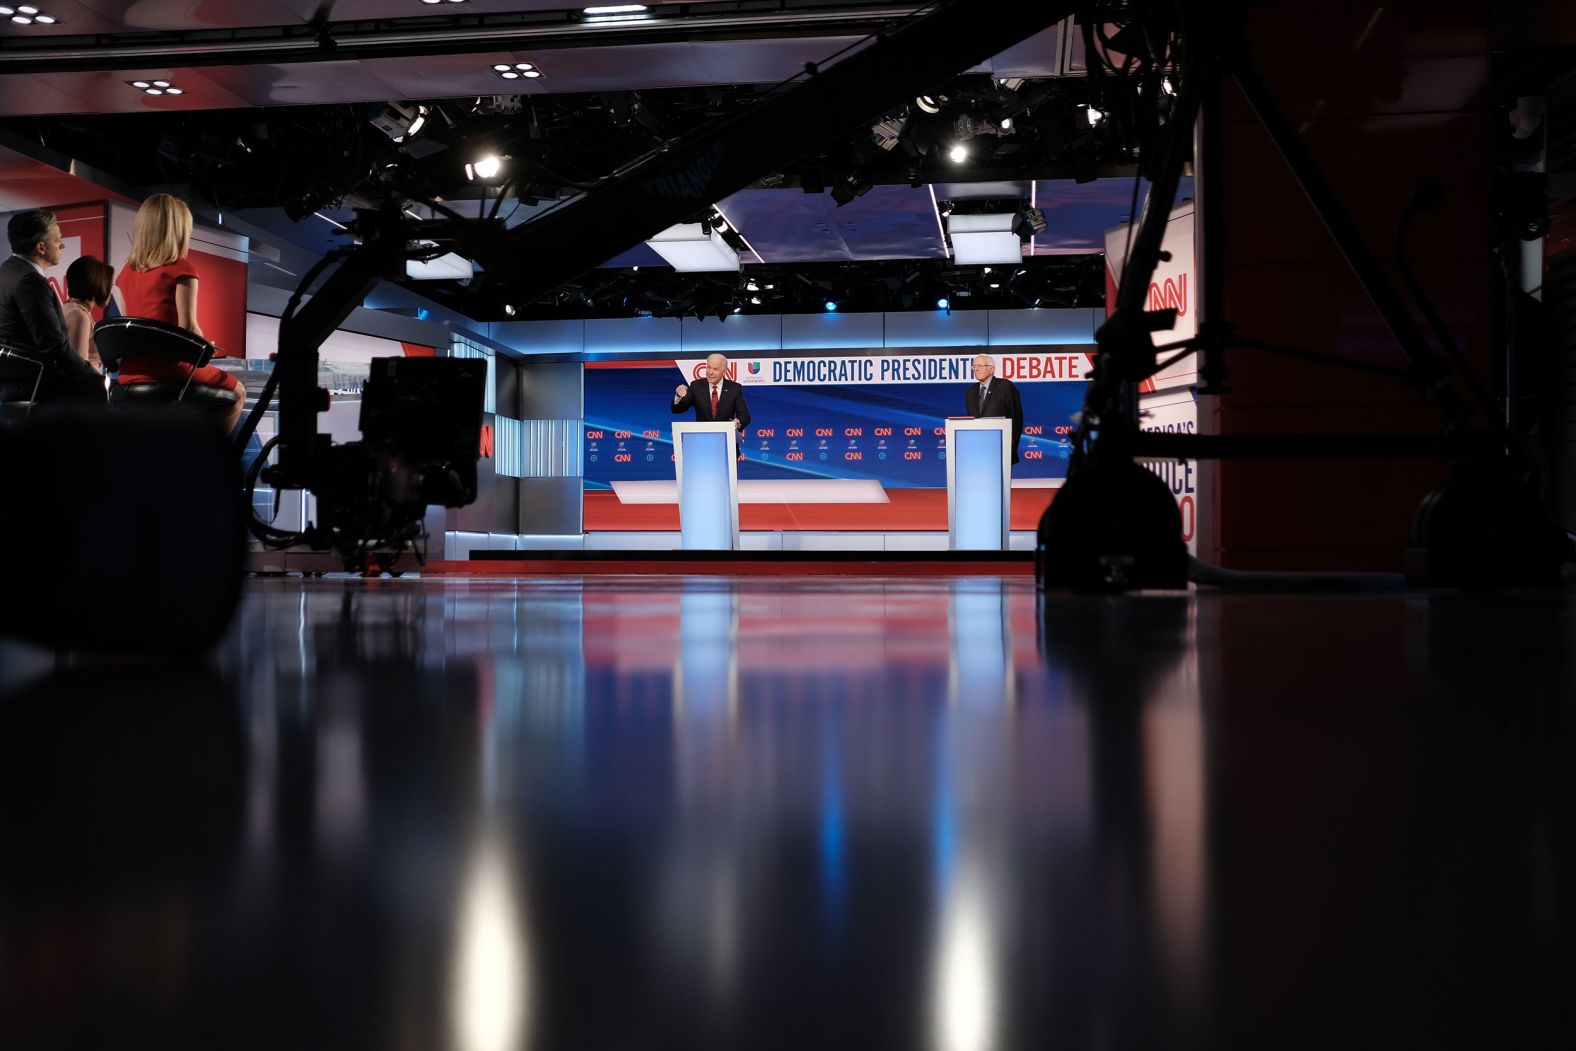 The debate was initially supposed to take place in Arizona with a live audience.